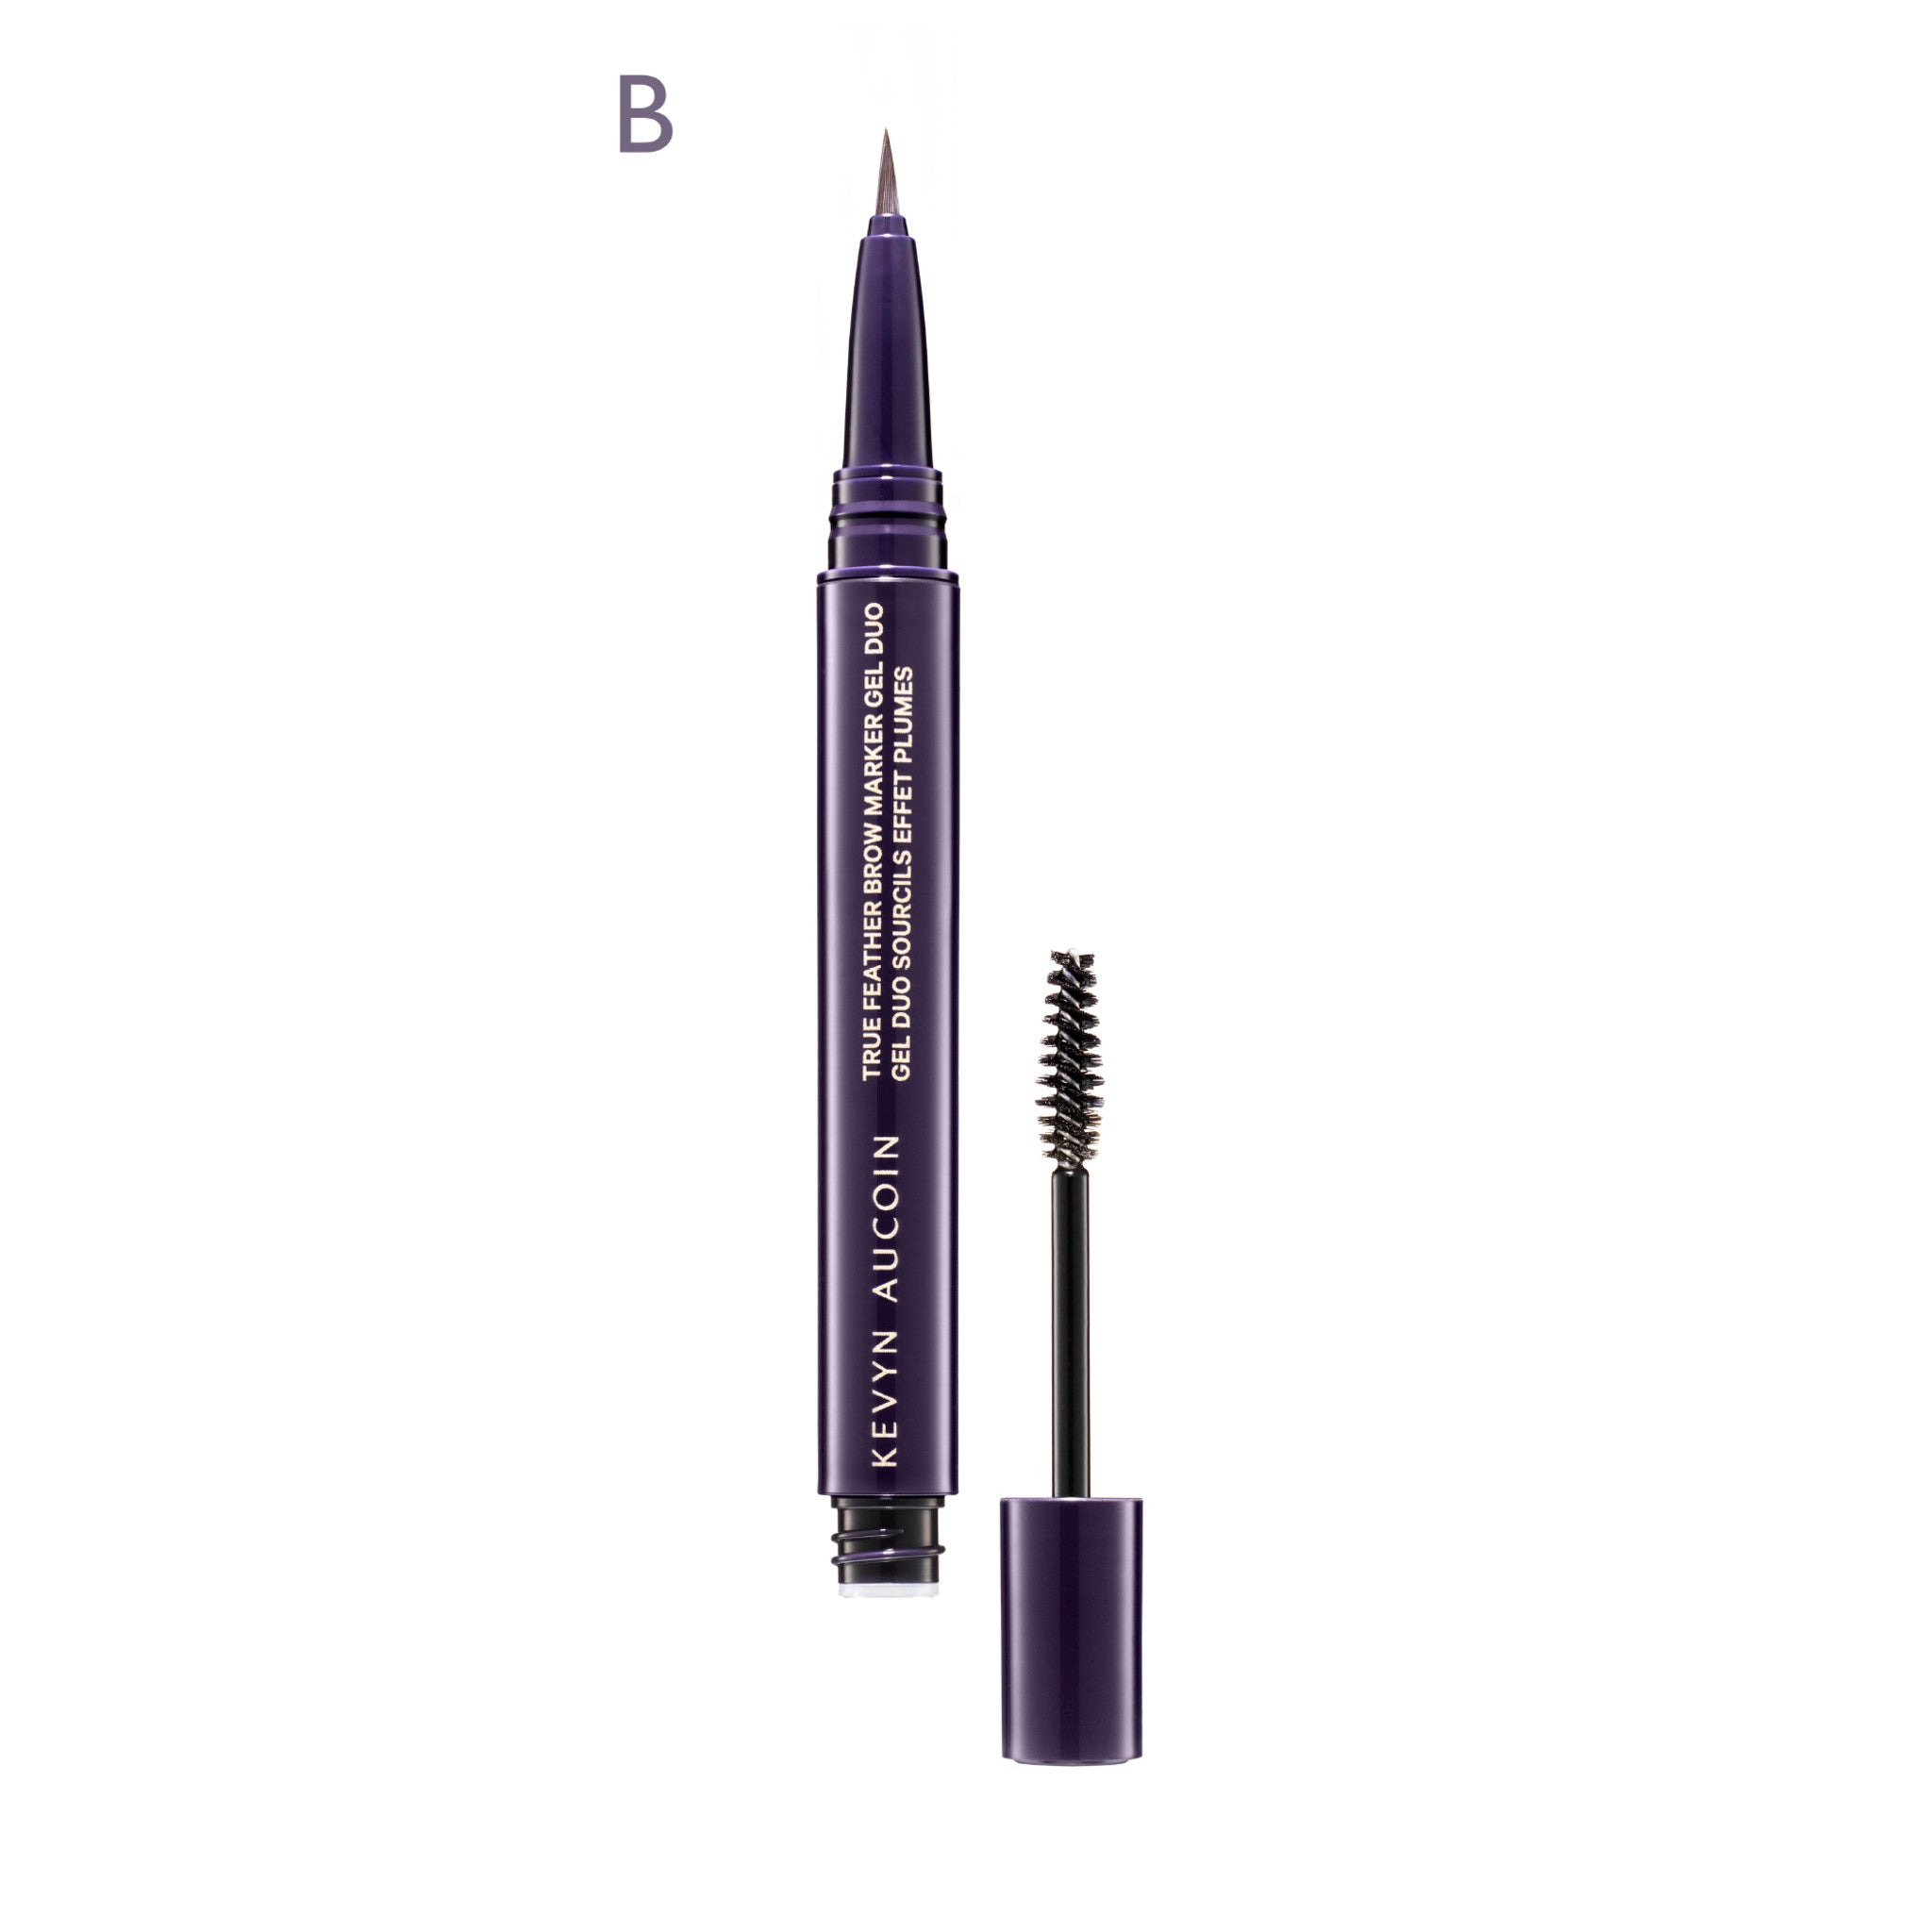 Kevyn Aucoin True Feather Brow Marker Gel Duo Color/Shade variant: Brunette